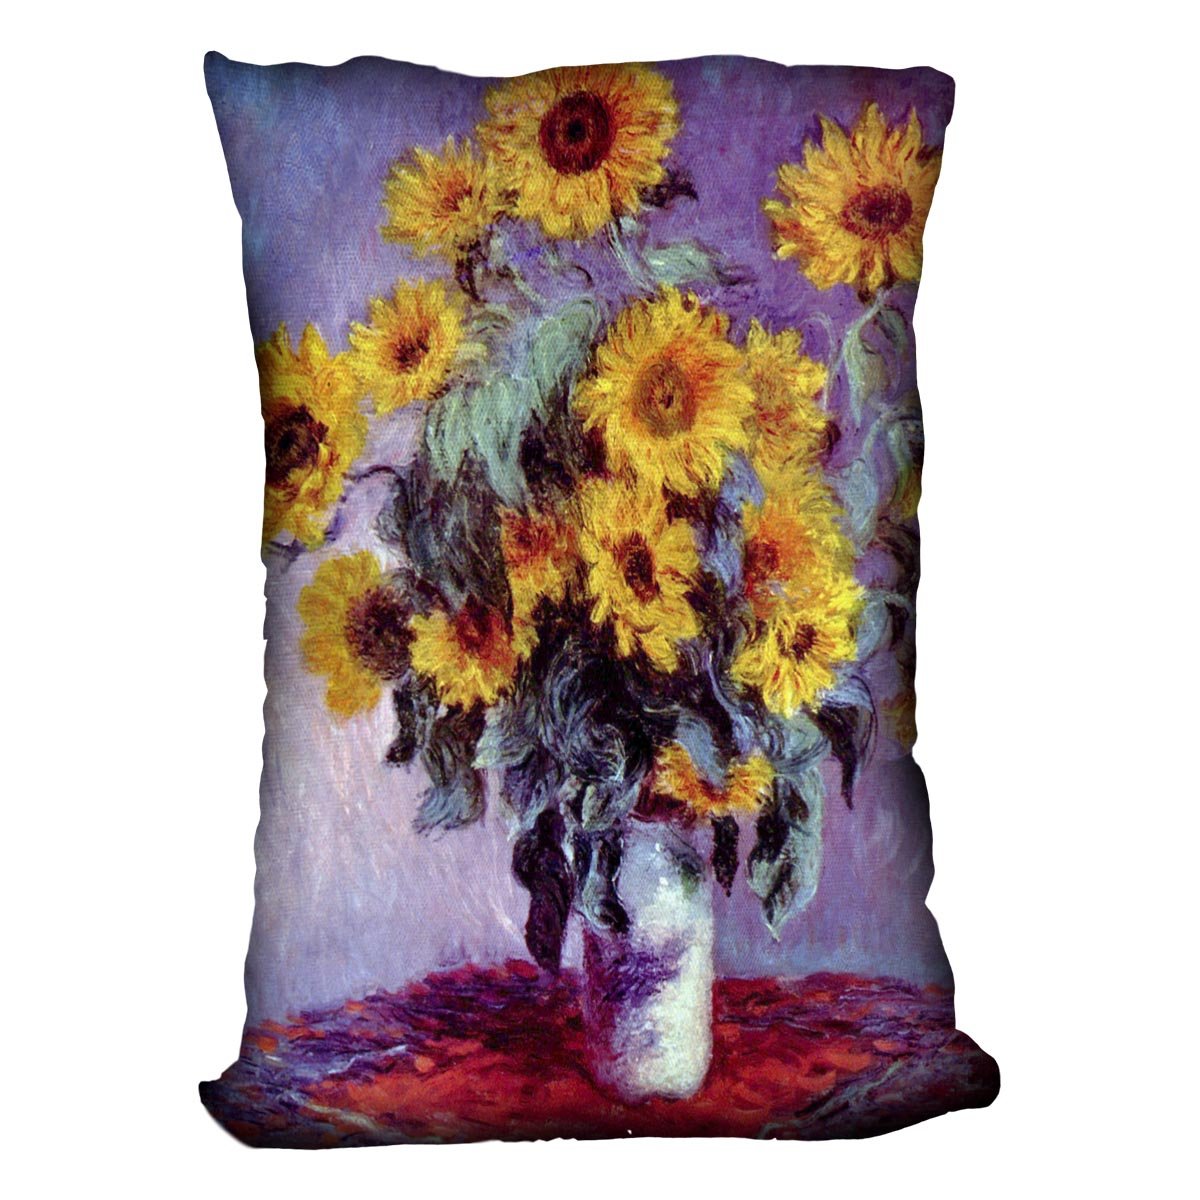 Still Life with Sunflowers by Monet Throw Pillow